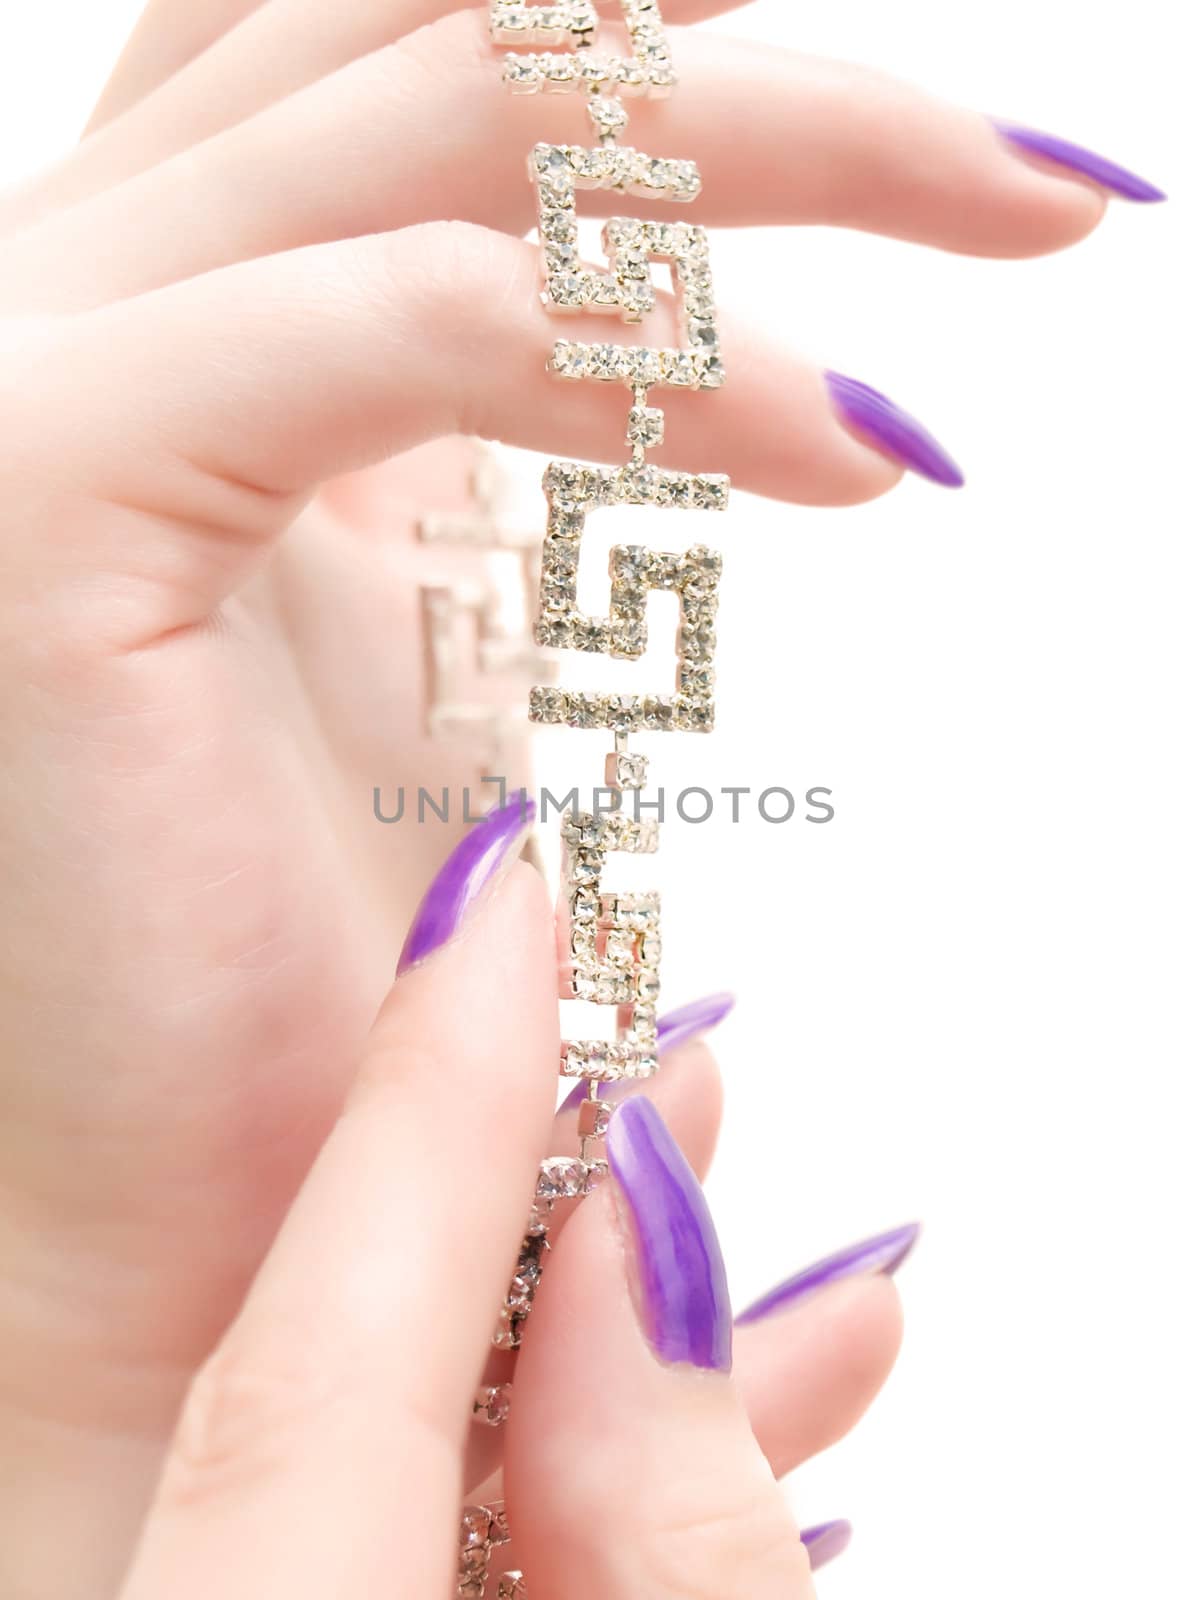 jewelry in woman hands with lilac manicure